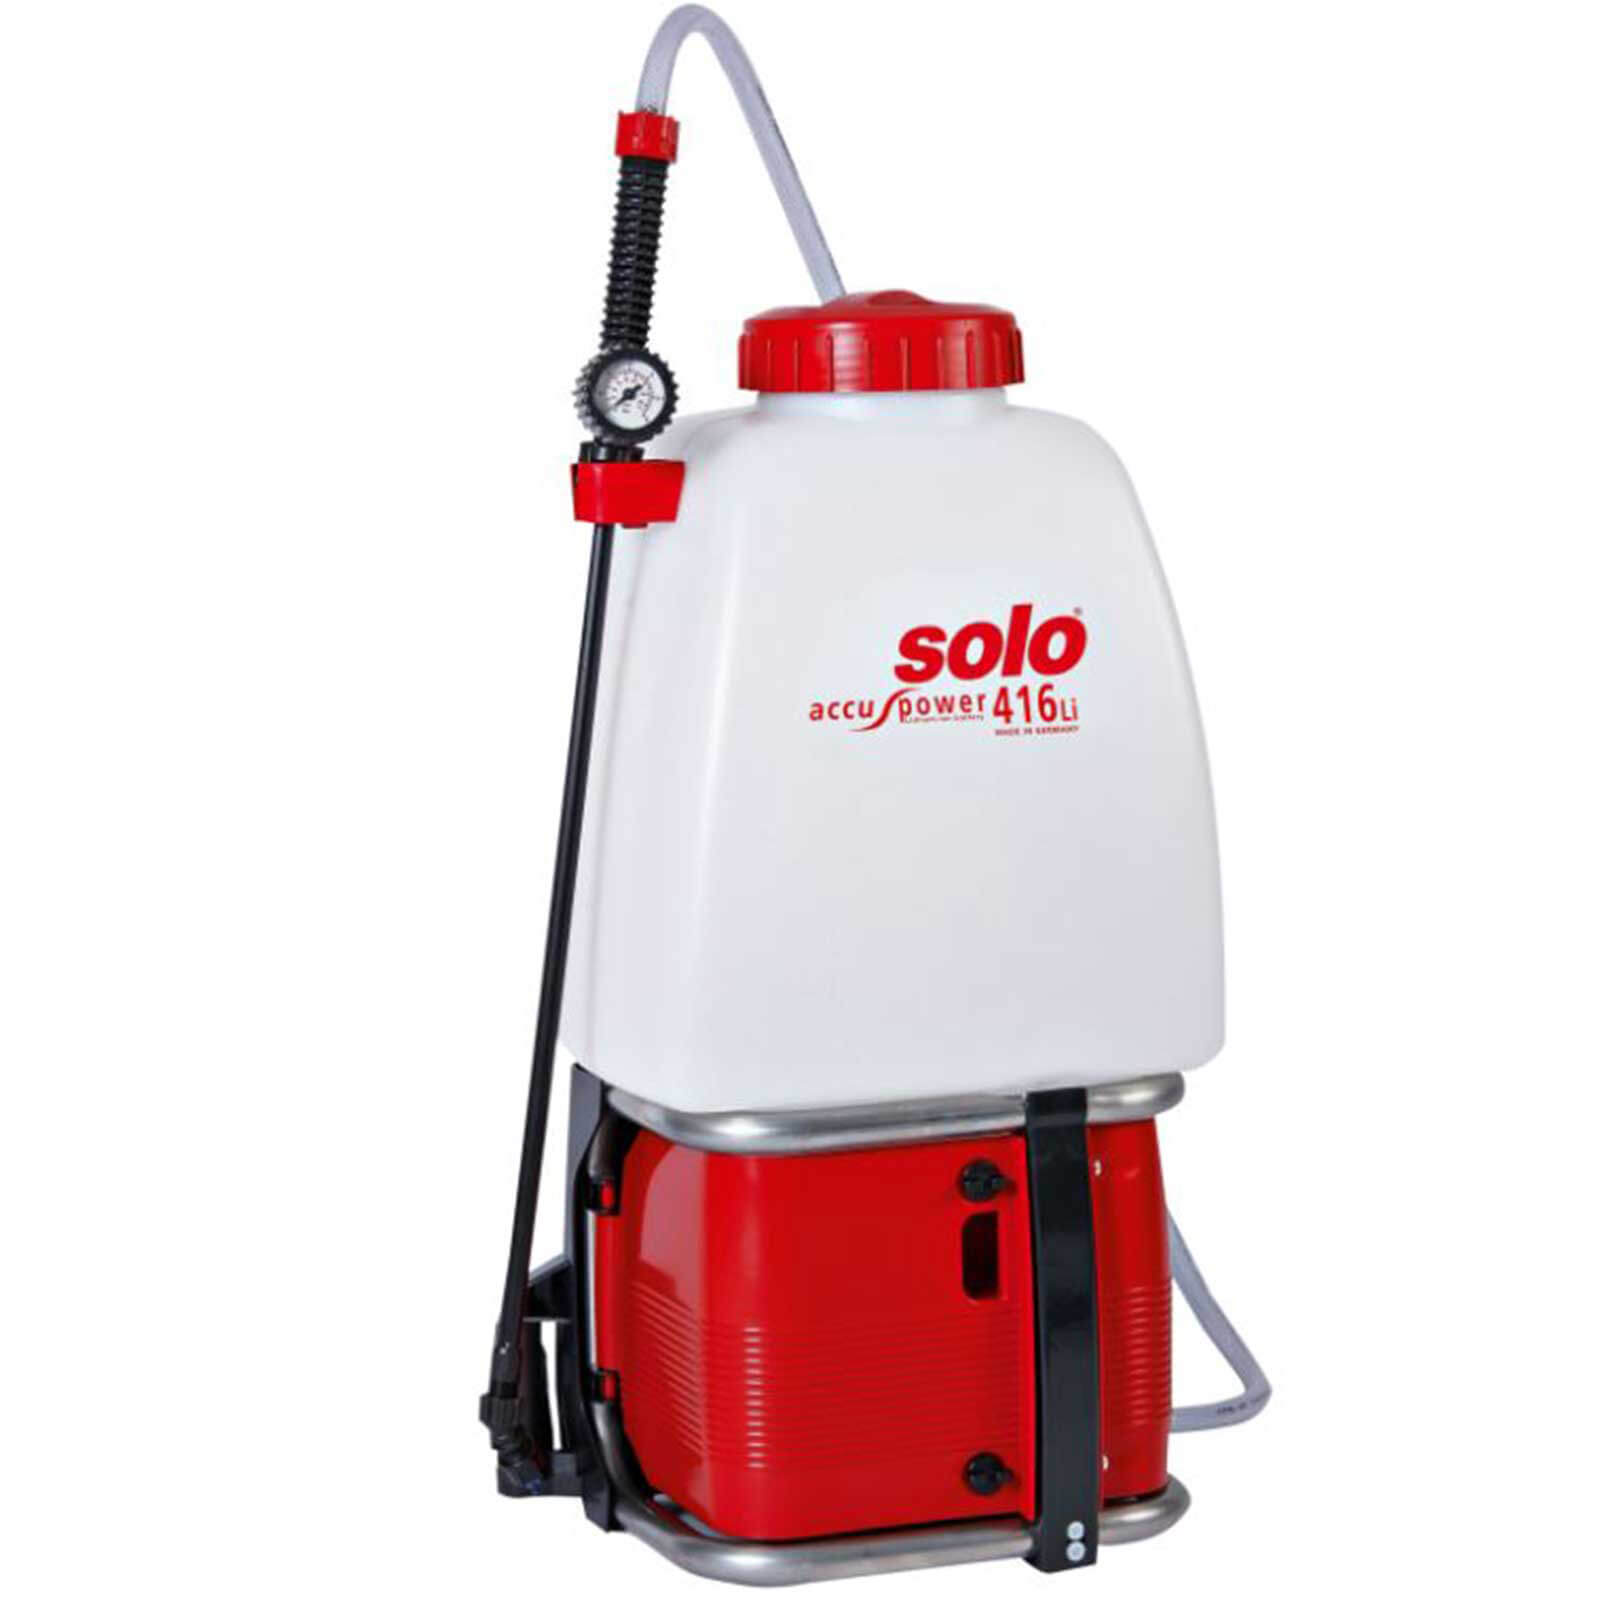 Solo 416LI Rechargeable Chemical and Water Sprayer 20l